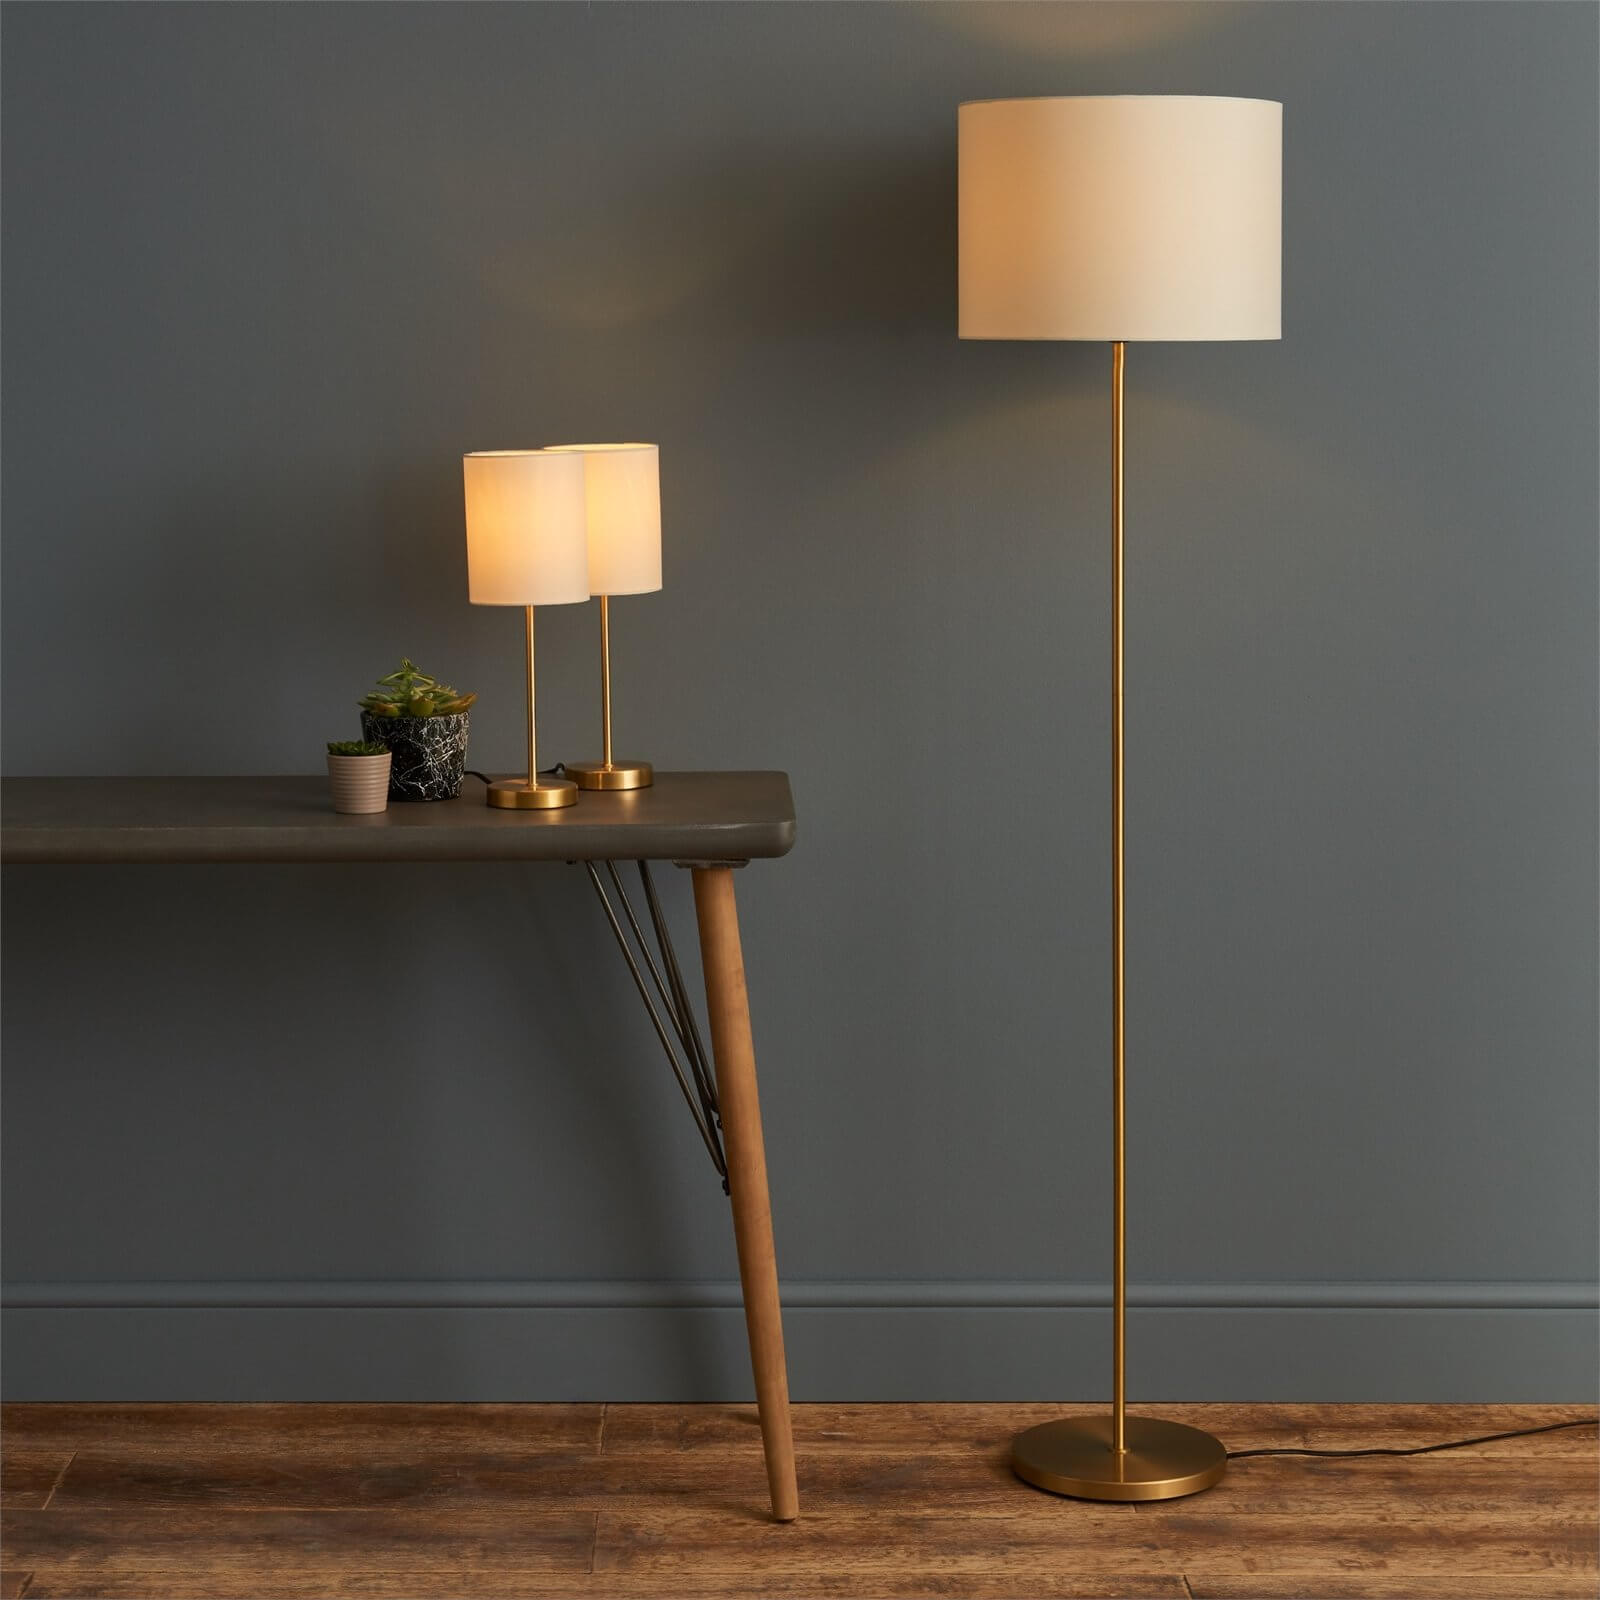 Floor Lamp & Matching Table Lamps Set - Gold and Cream